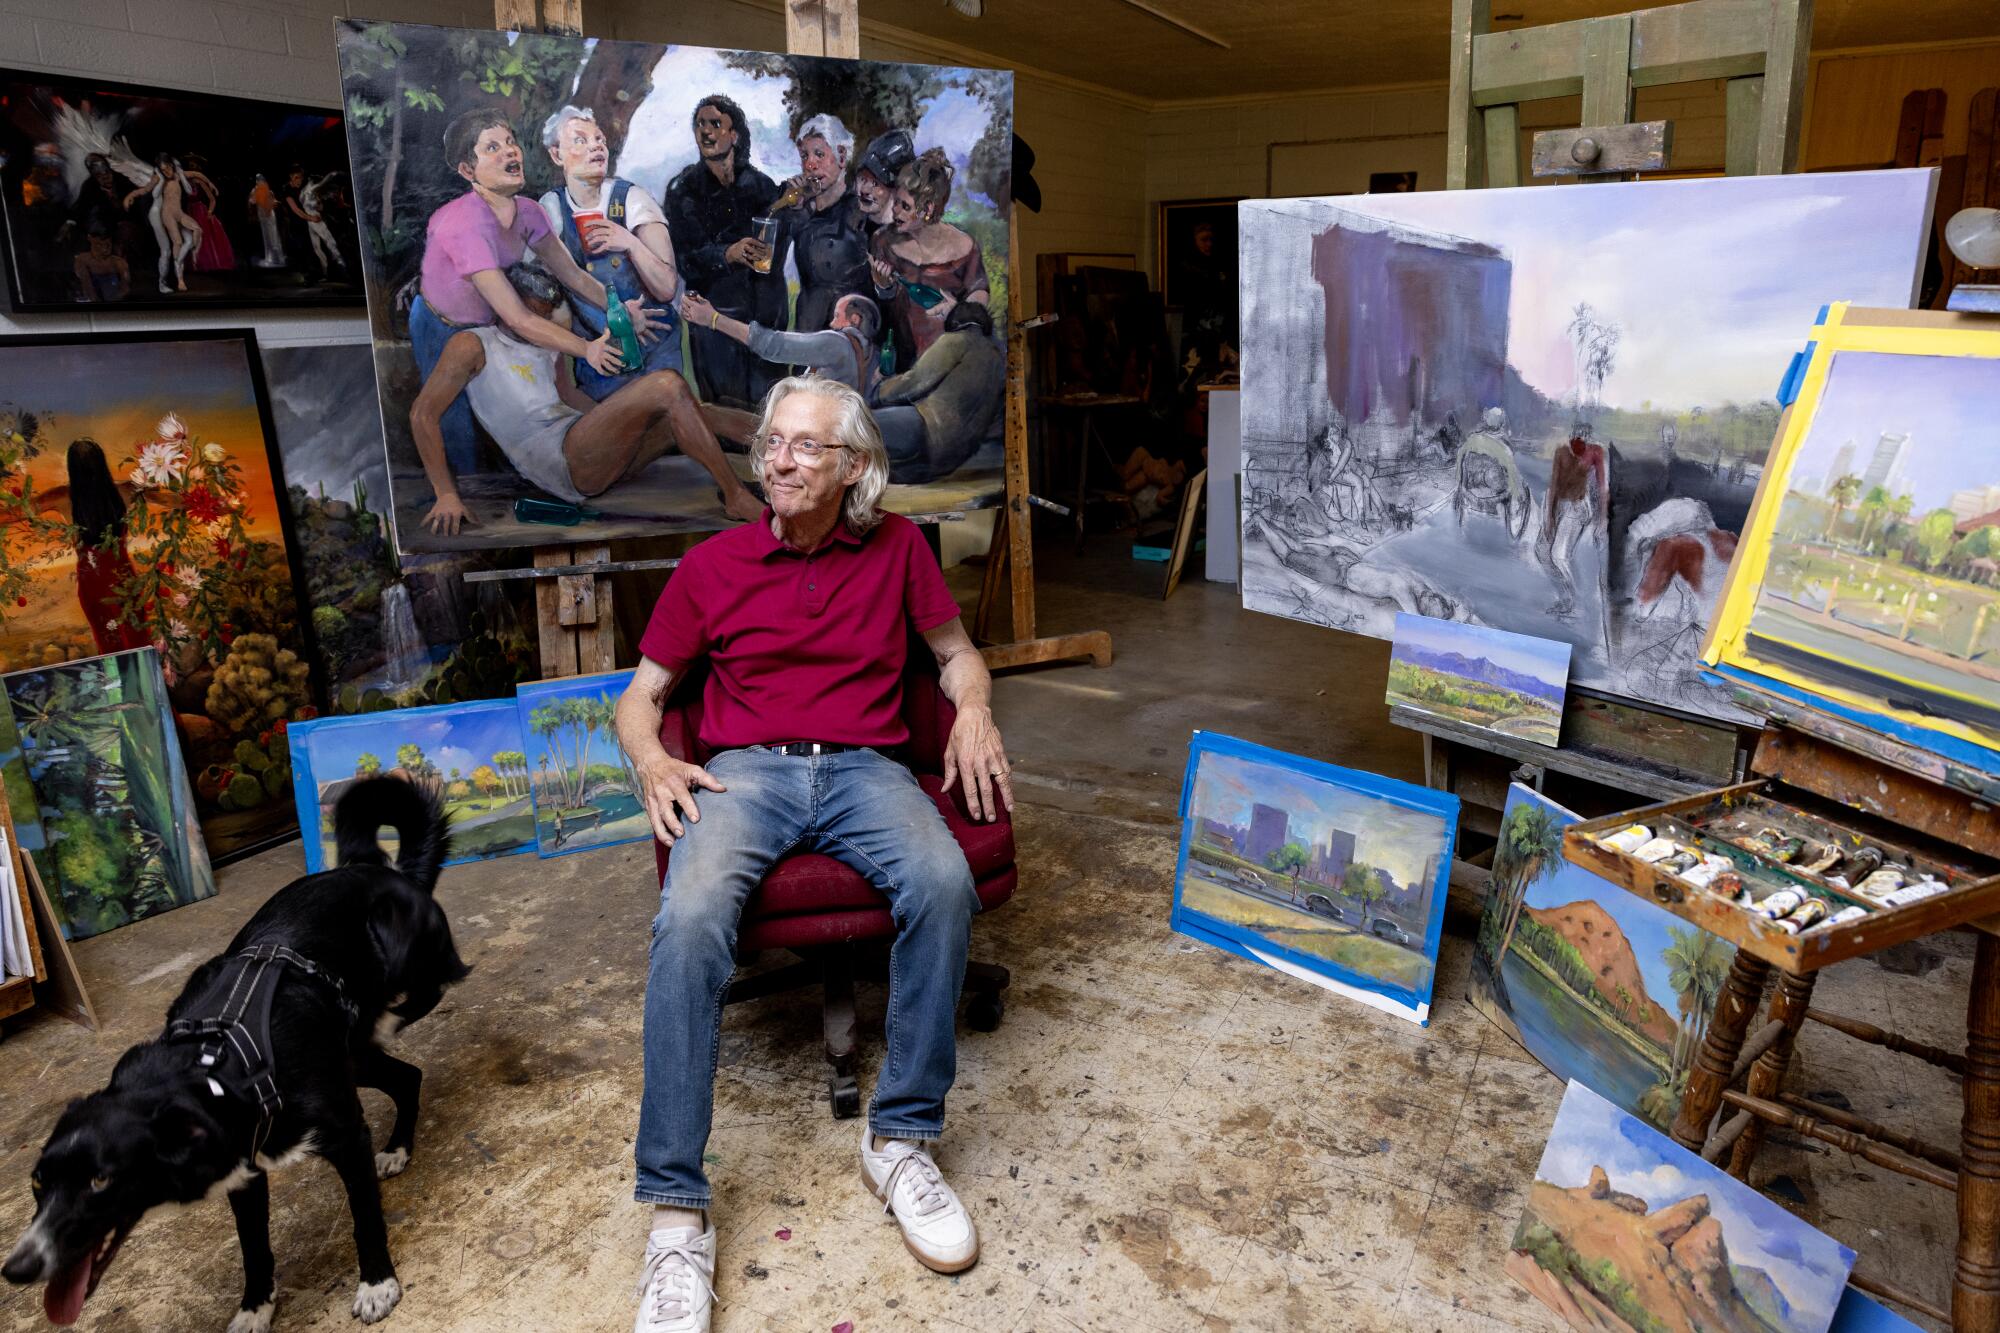 A man sits next to a dog surrounded by paintings in a studio